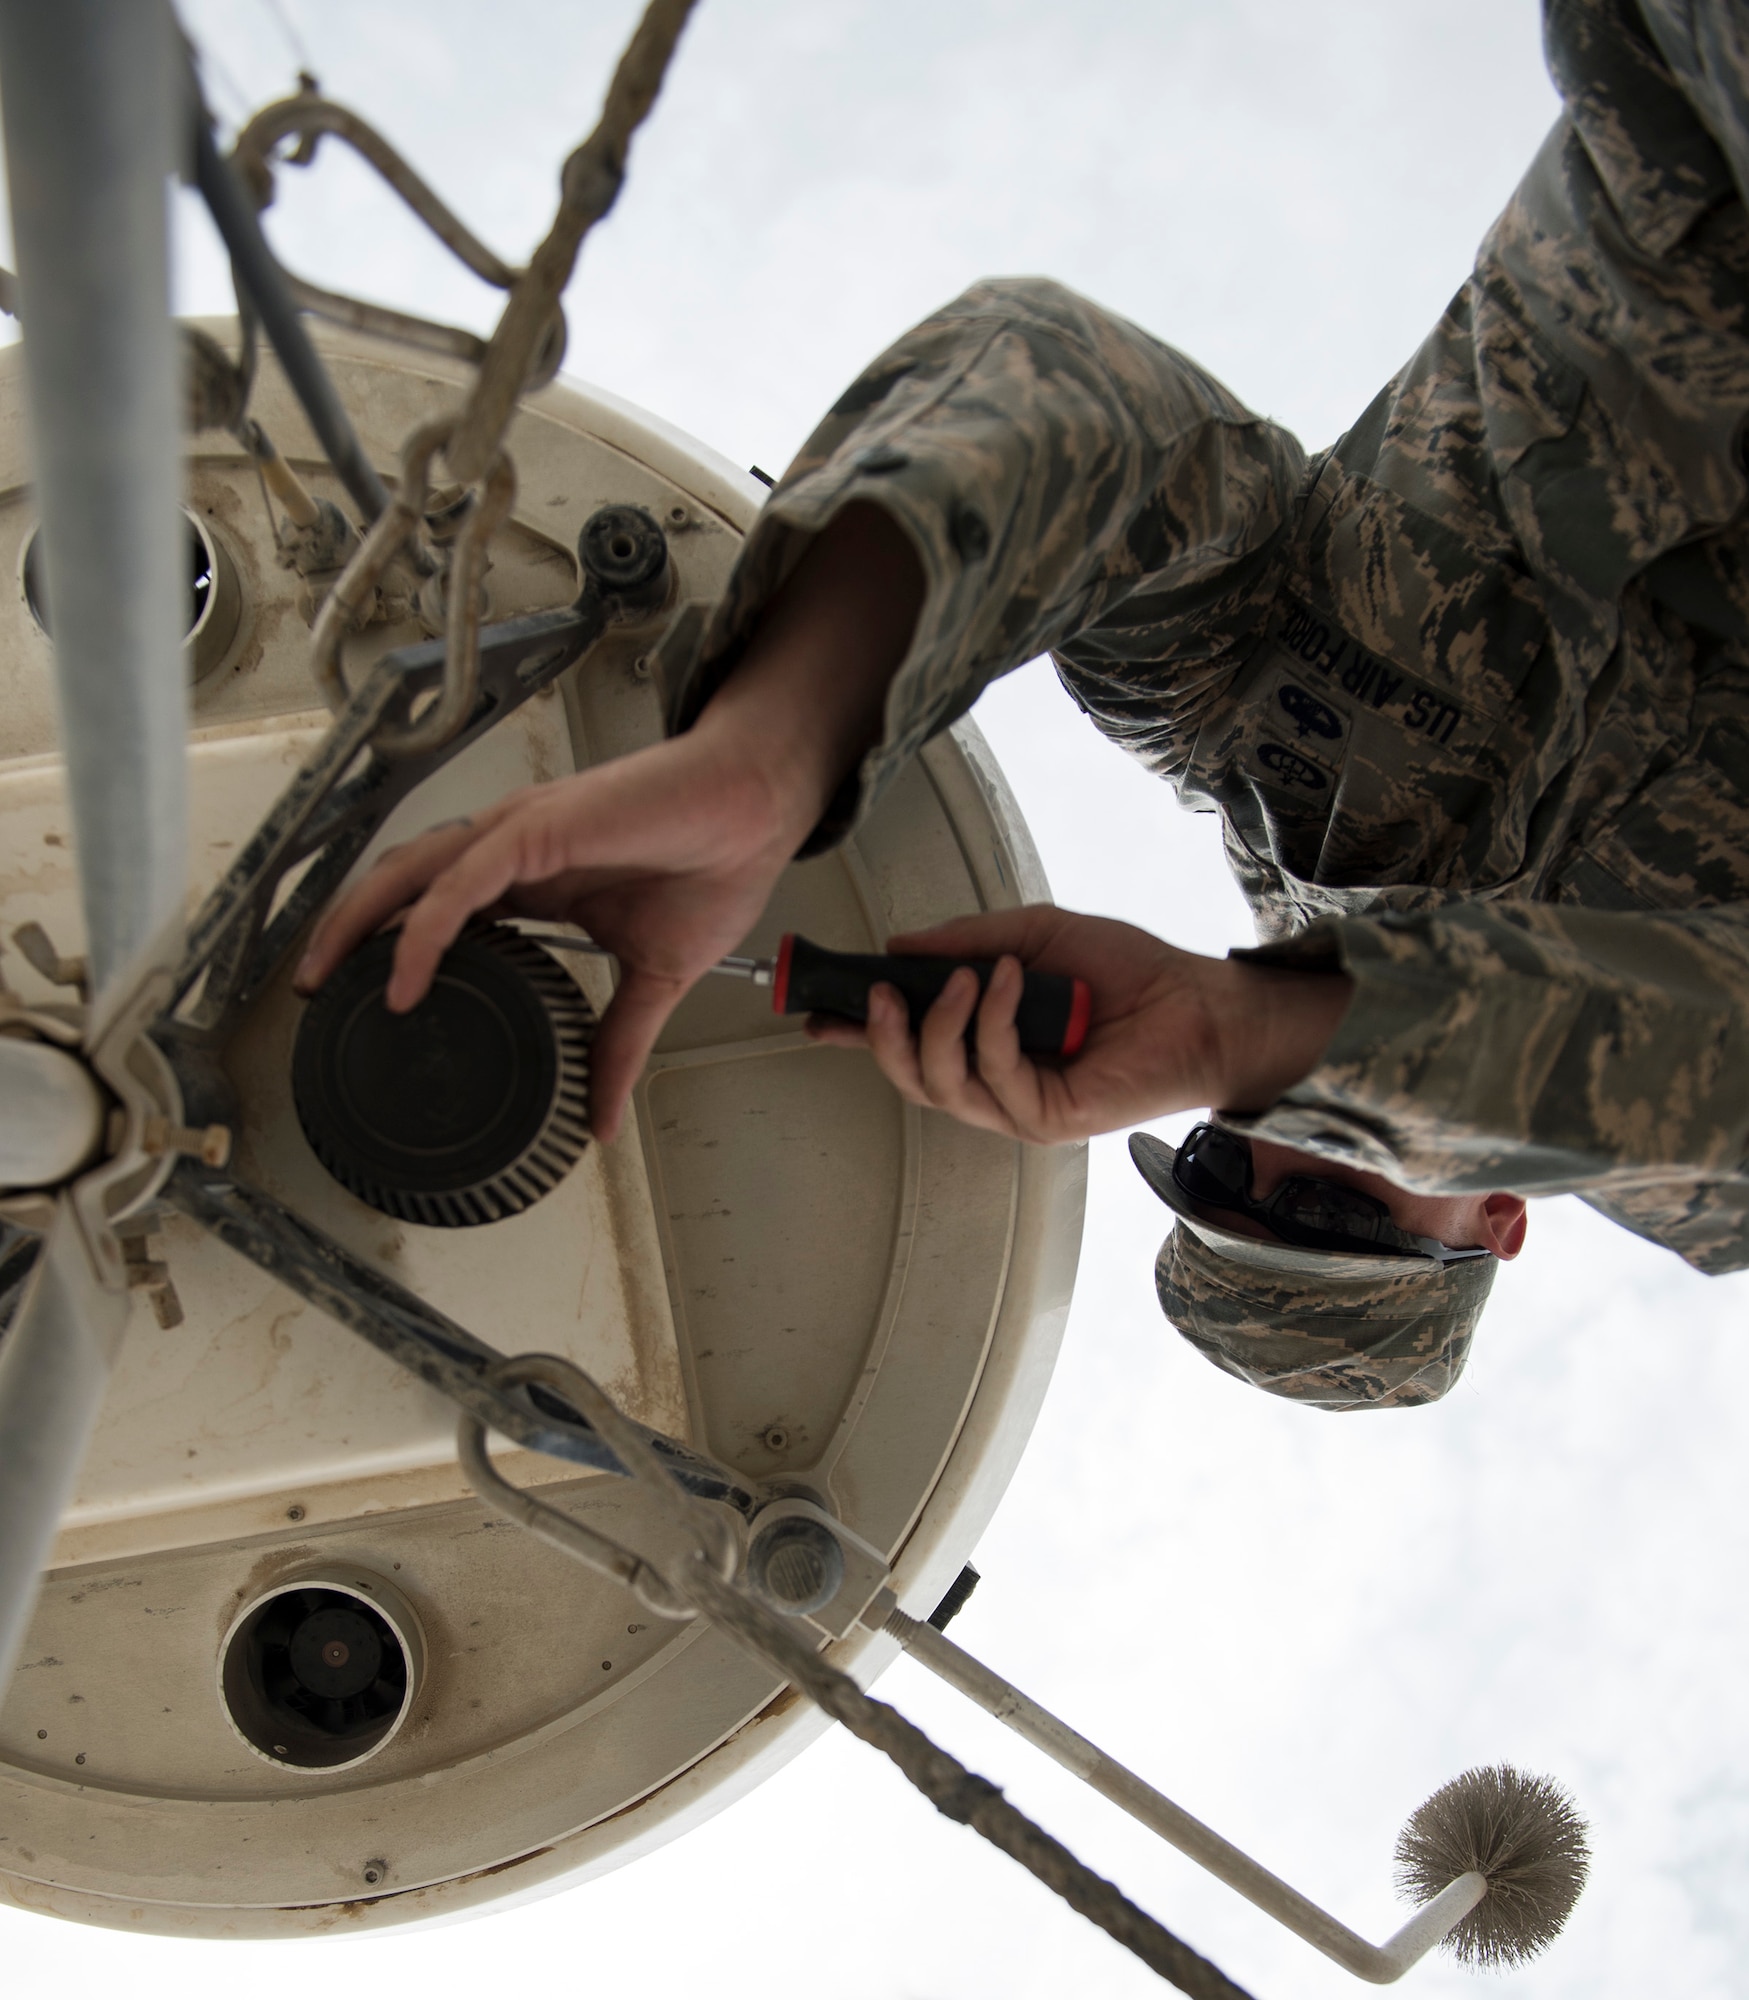 U.S. Air Force Staff Sgt. Erik Gaunt, mission services NCOIC with the 379th Expeditionary Operations Support Squadron, Operations Weather Flight changes the air filter on a portal doppler radar at Al Udeid Air Base, Qatar, May 1, 2017. Gaunt is performing preventive maintenance on the radar so it can provide accurate and timely weather information to commanders and pilots so their mission goes as planned. (U.S. Air Force photo by Tech. Sgt. Amy M. Lovgren)